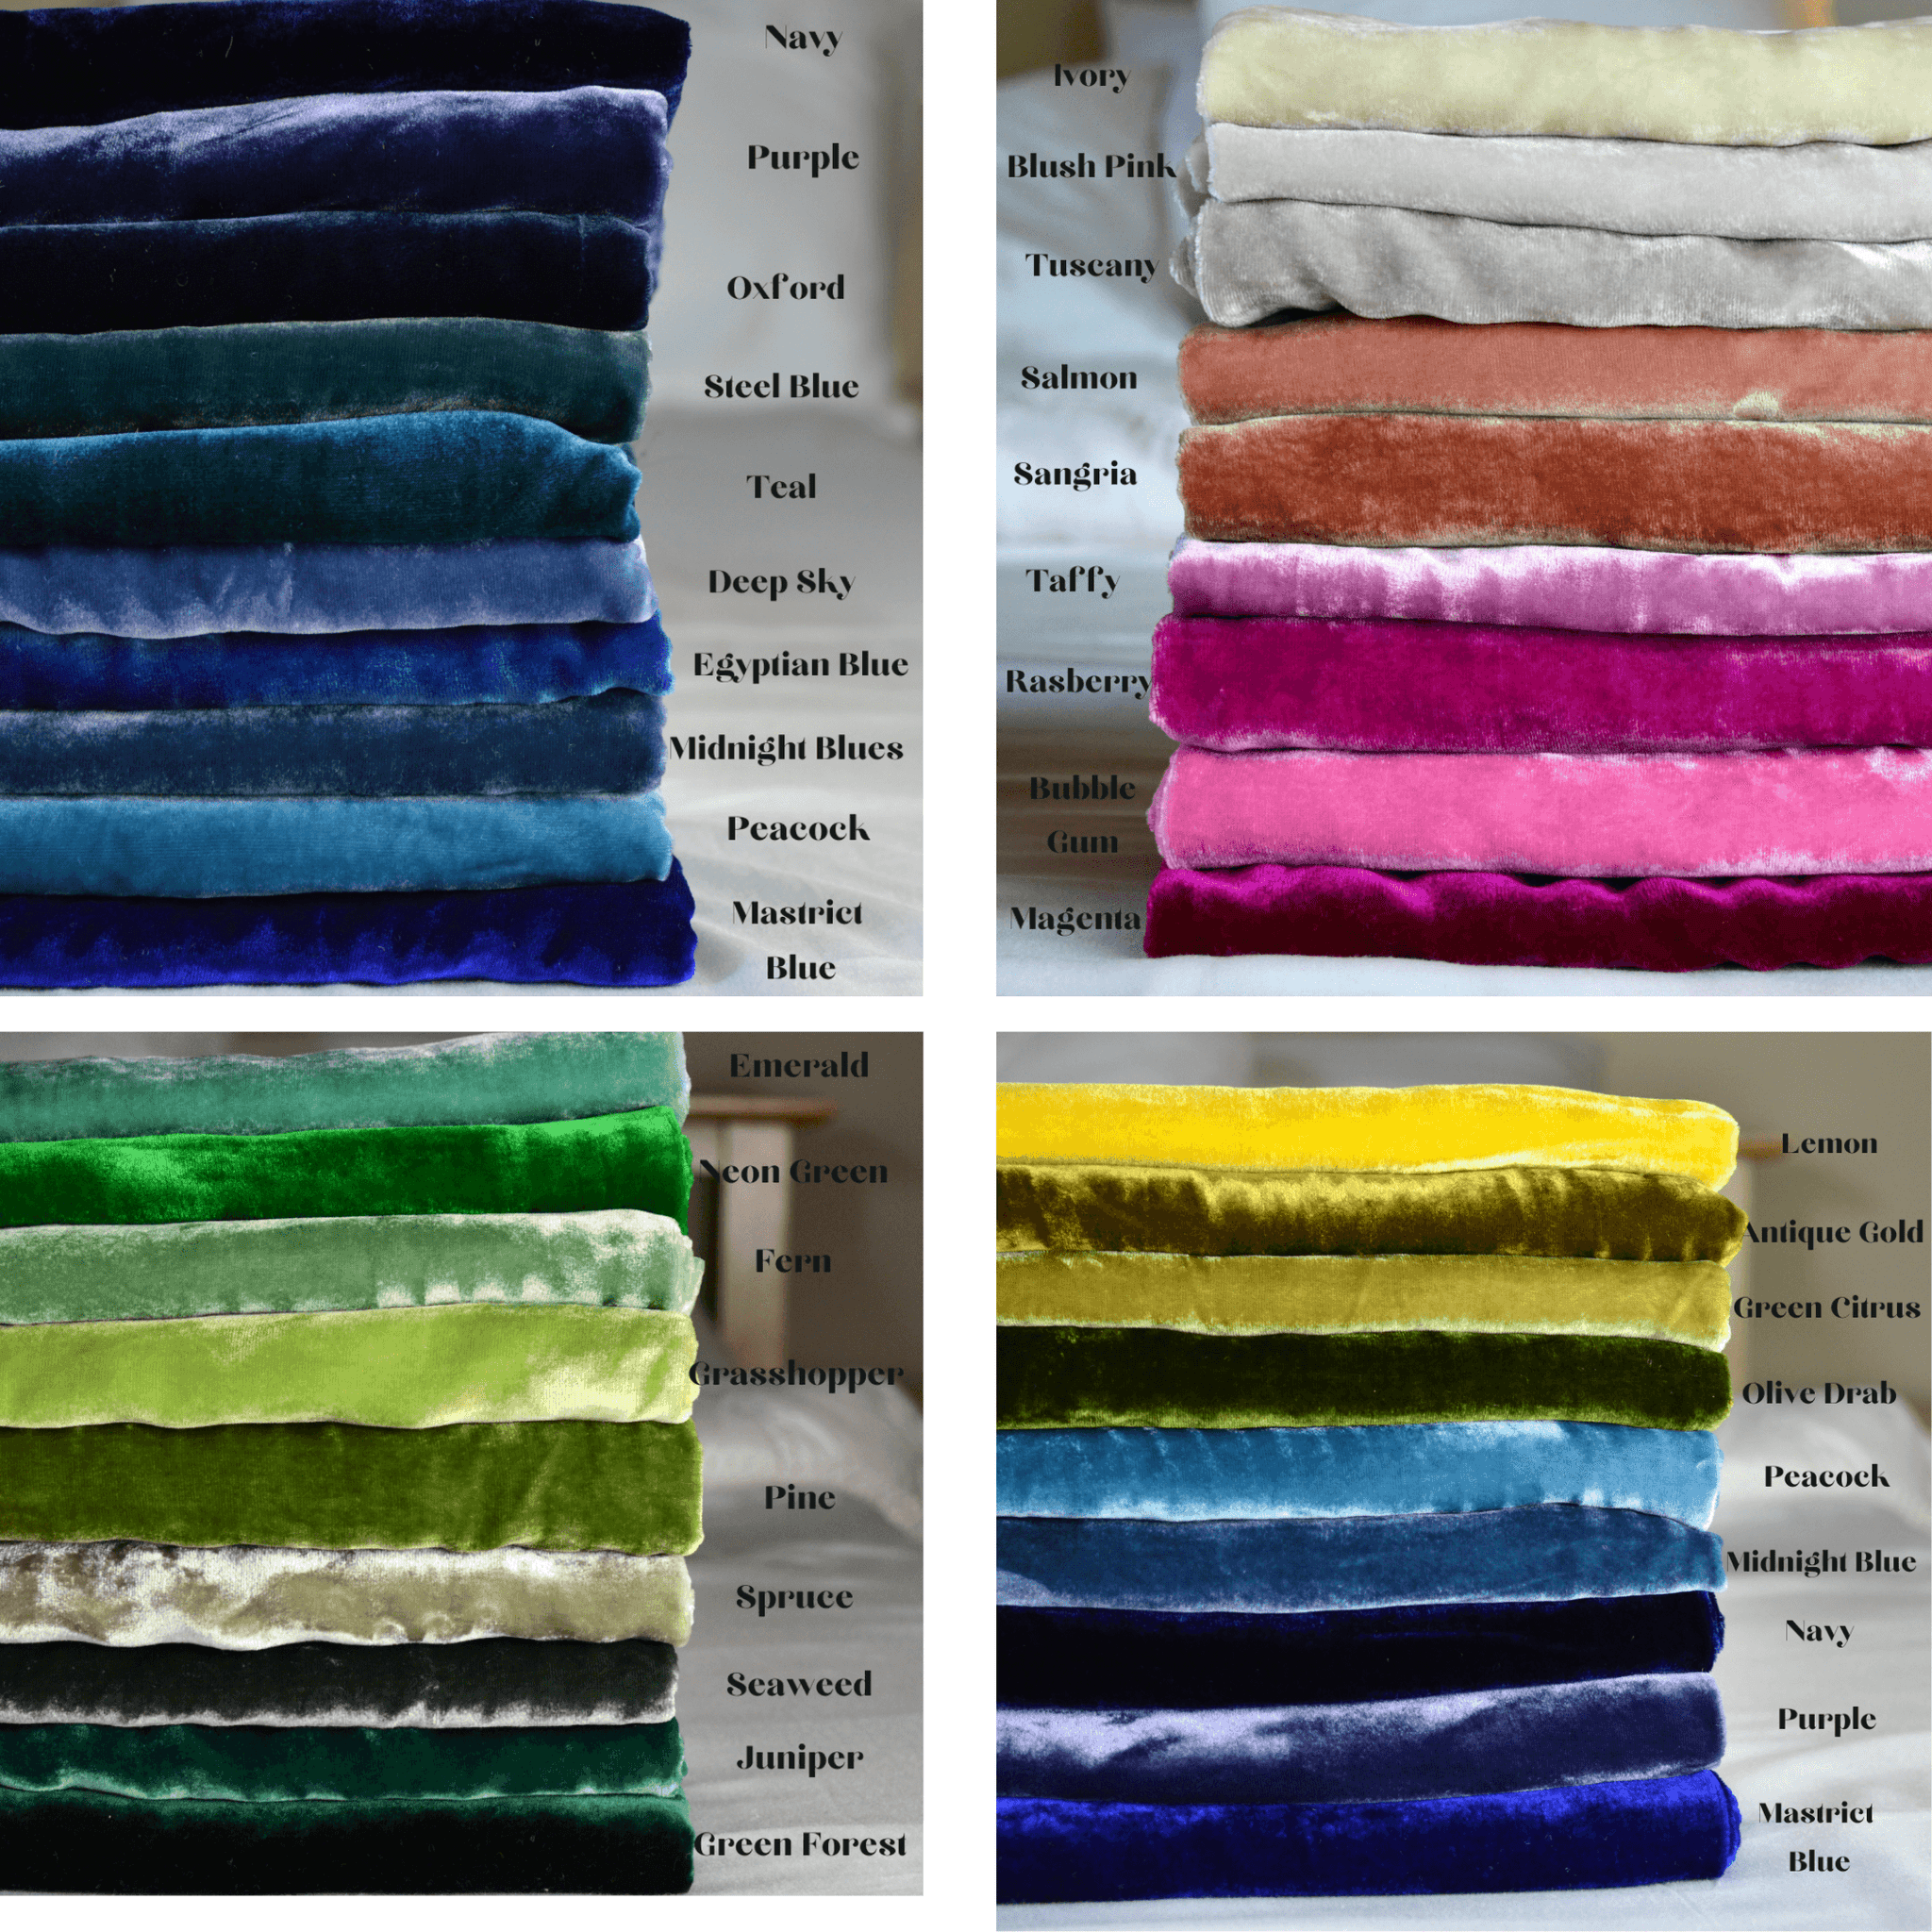 Luala Silk color Fabric swatches Fabric by Yard Whole sale 45 inches width Vietnam Silk producer California design Luala Eco